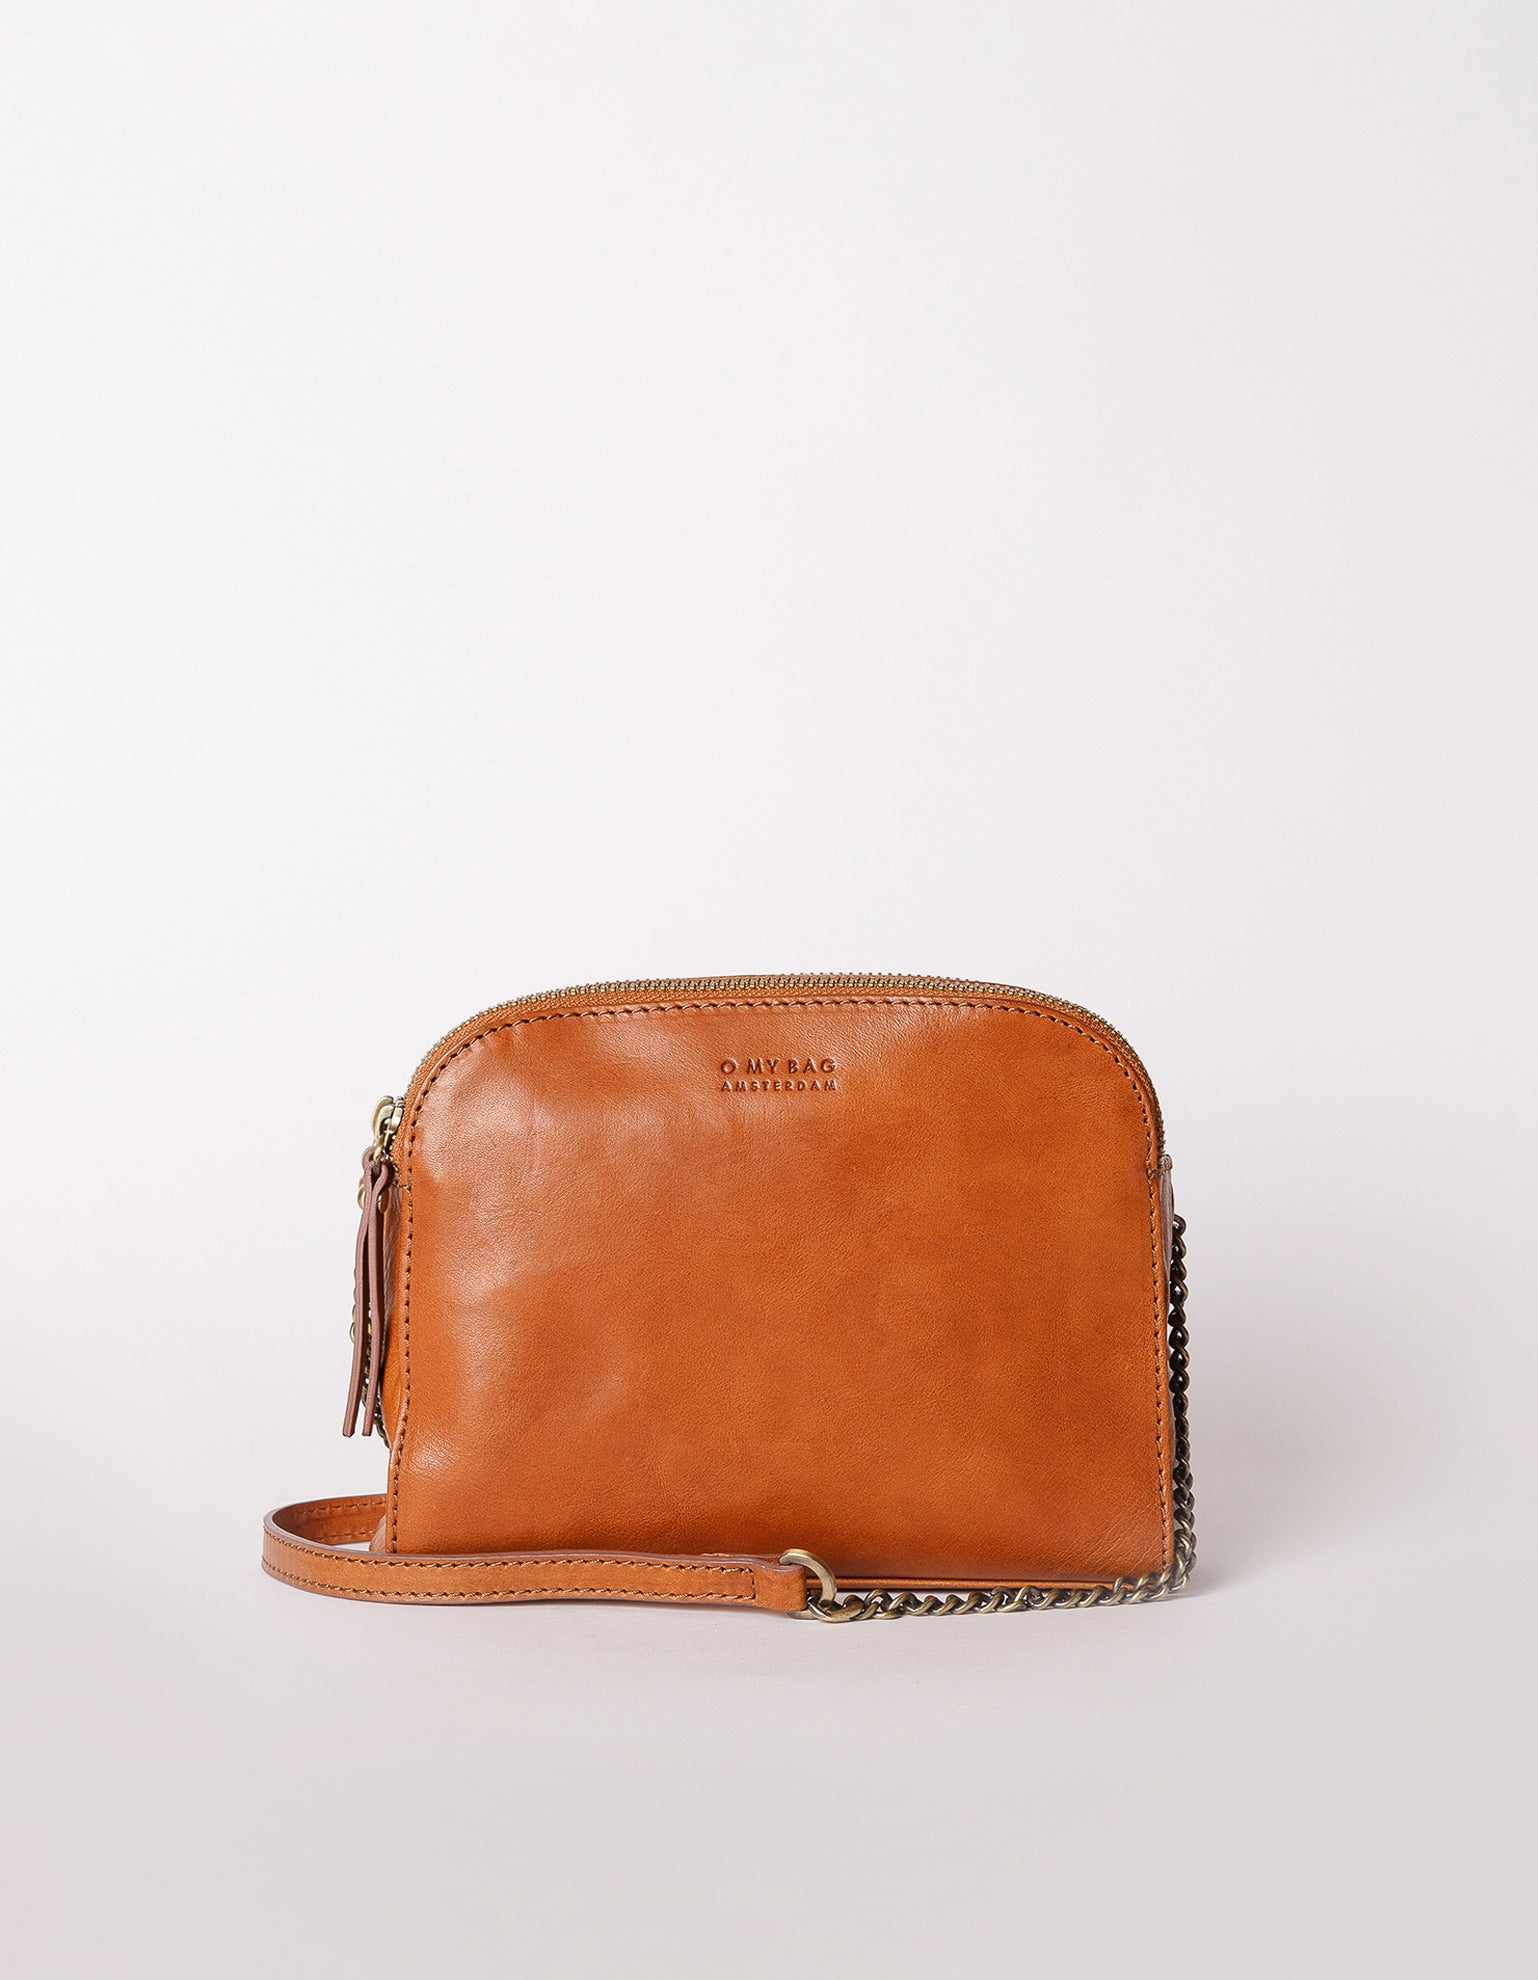 Emily Strap with Chain | Stromboli Leather